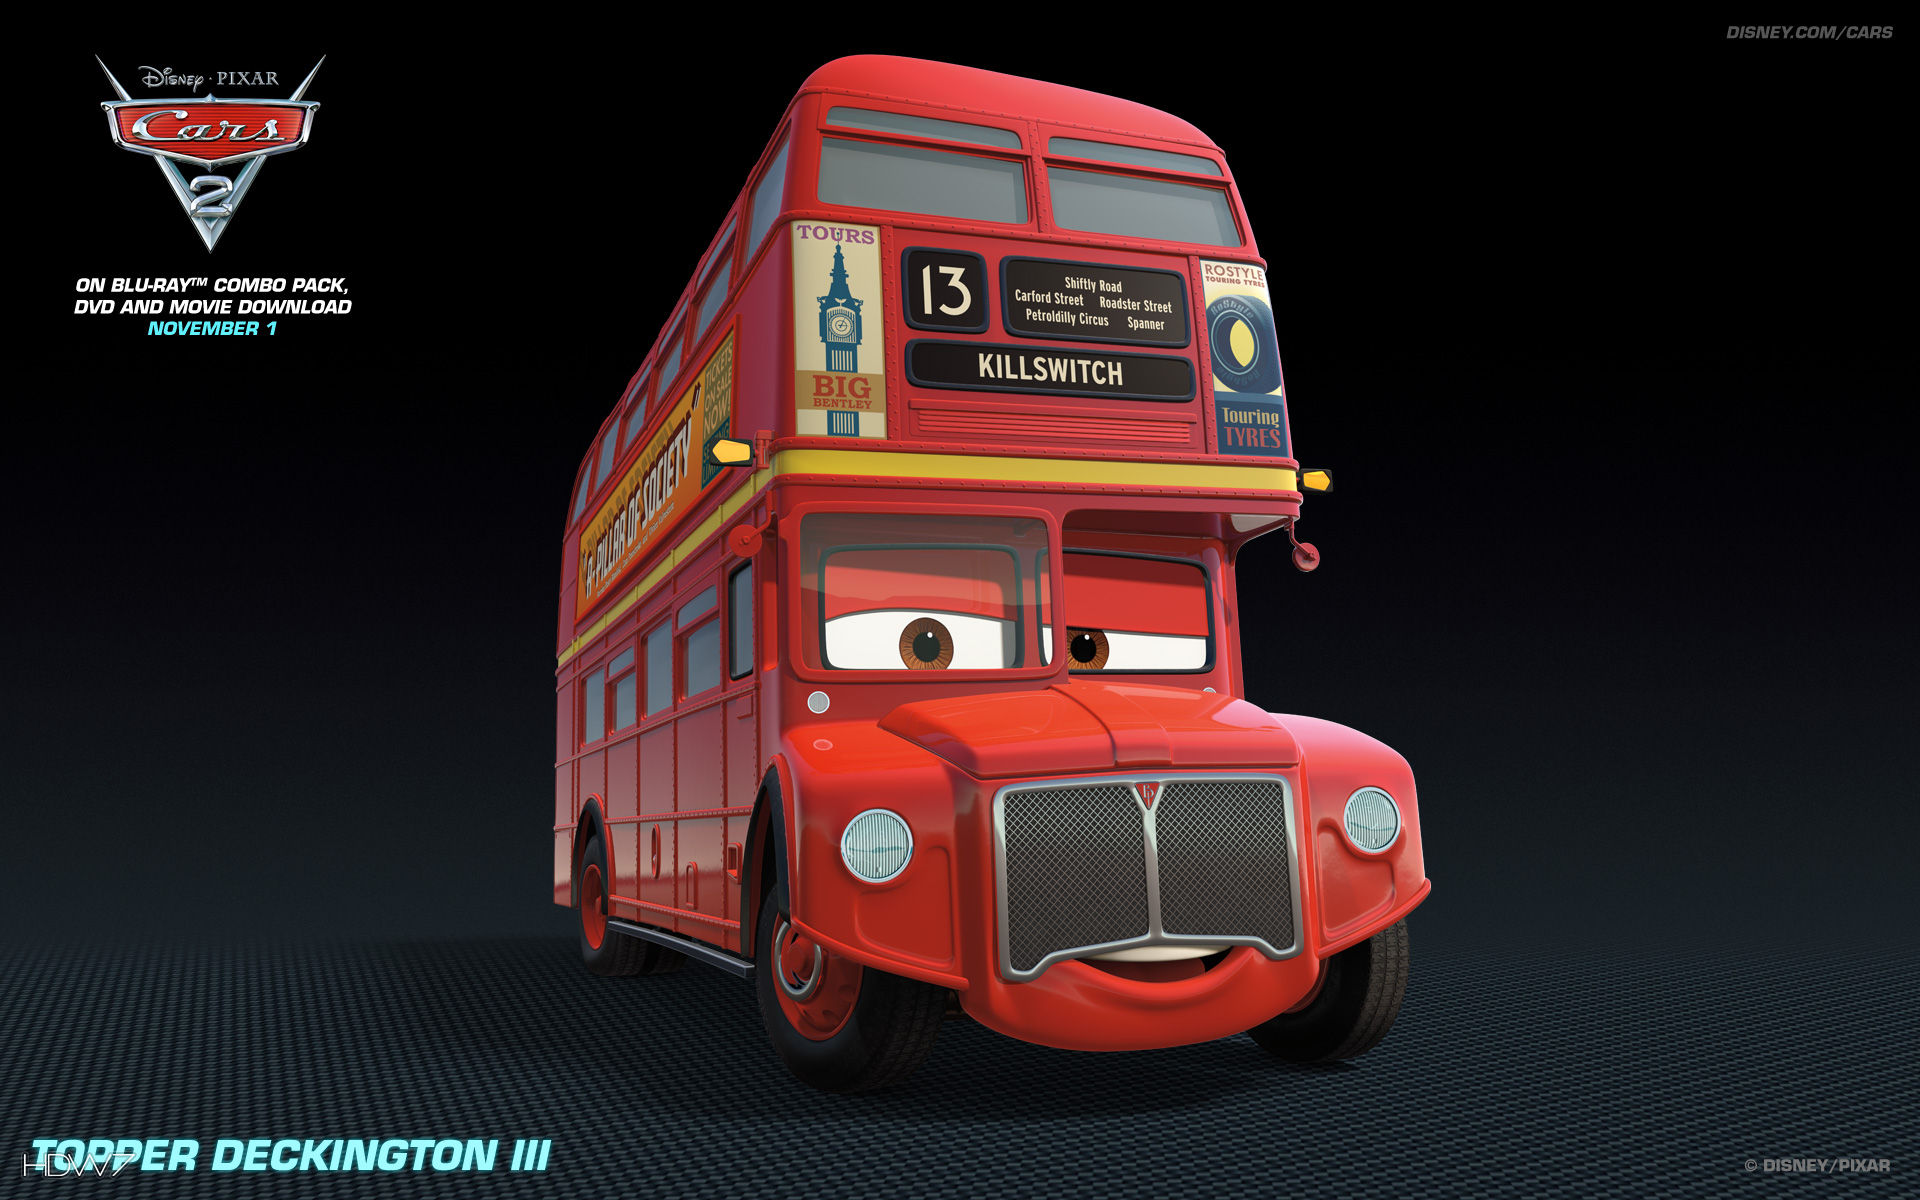 Cars 2 The Video Game Topper Deckington 3 Widescreen - Bus From Cars Movie  - 1920x1200 Wallpaper 